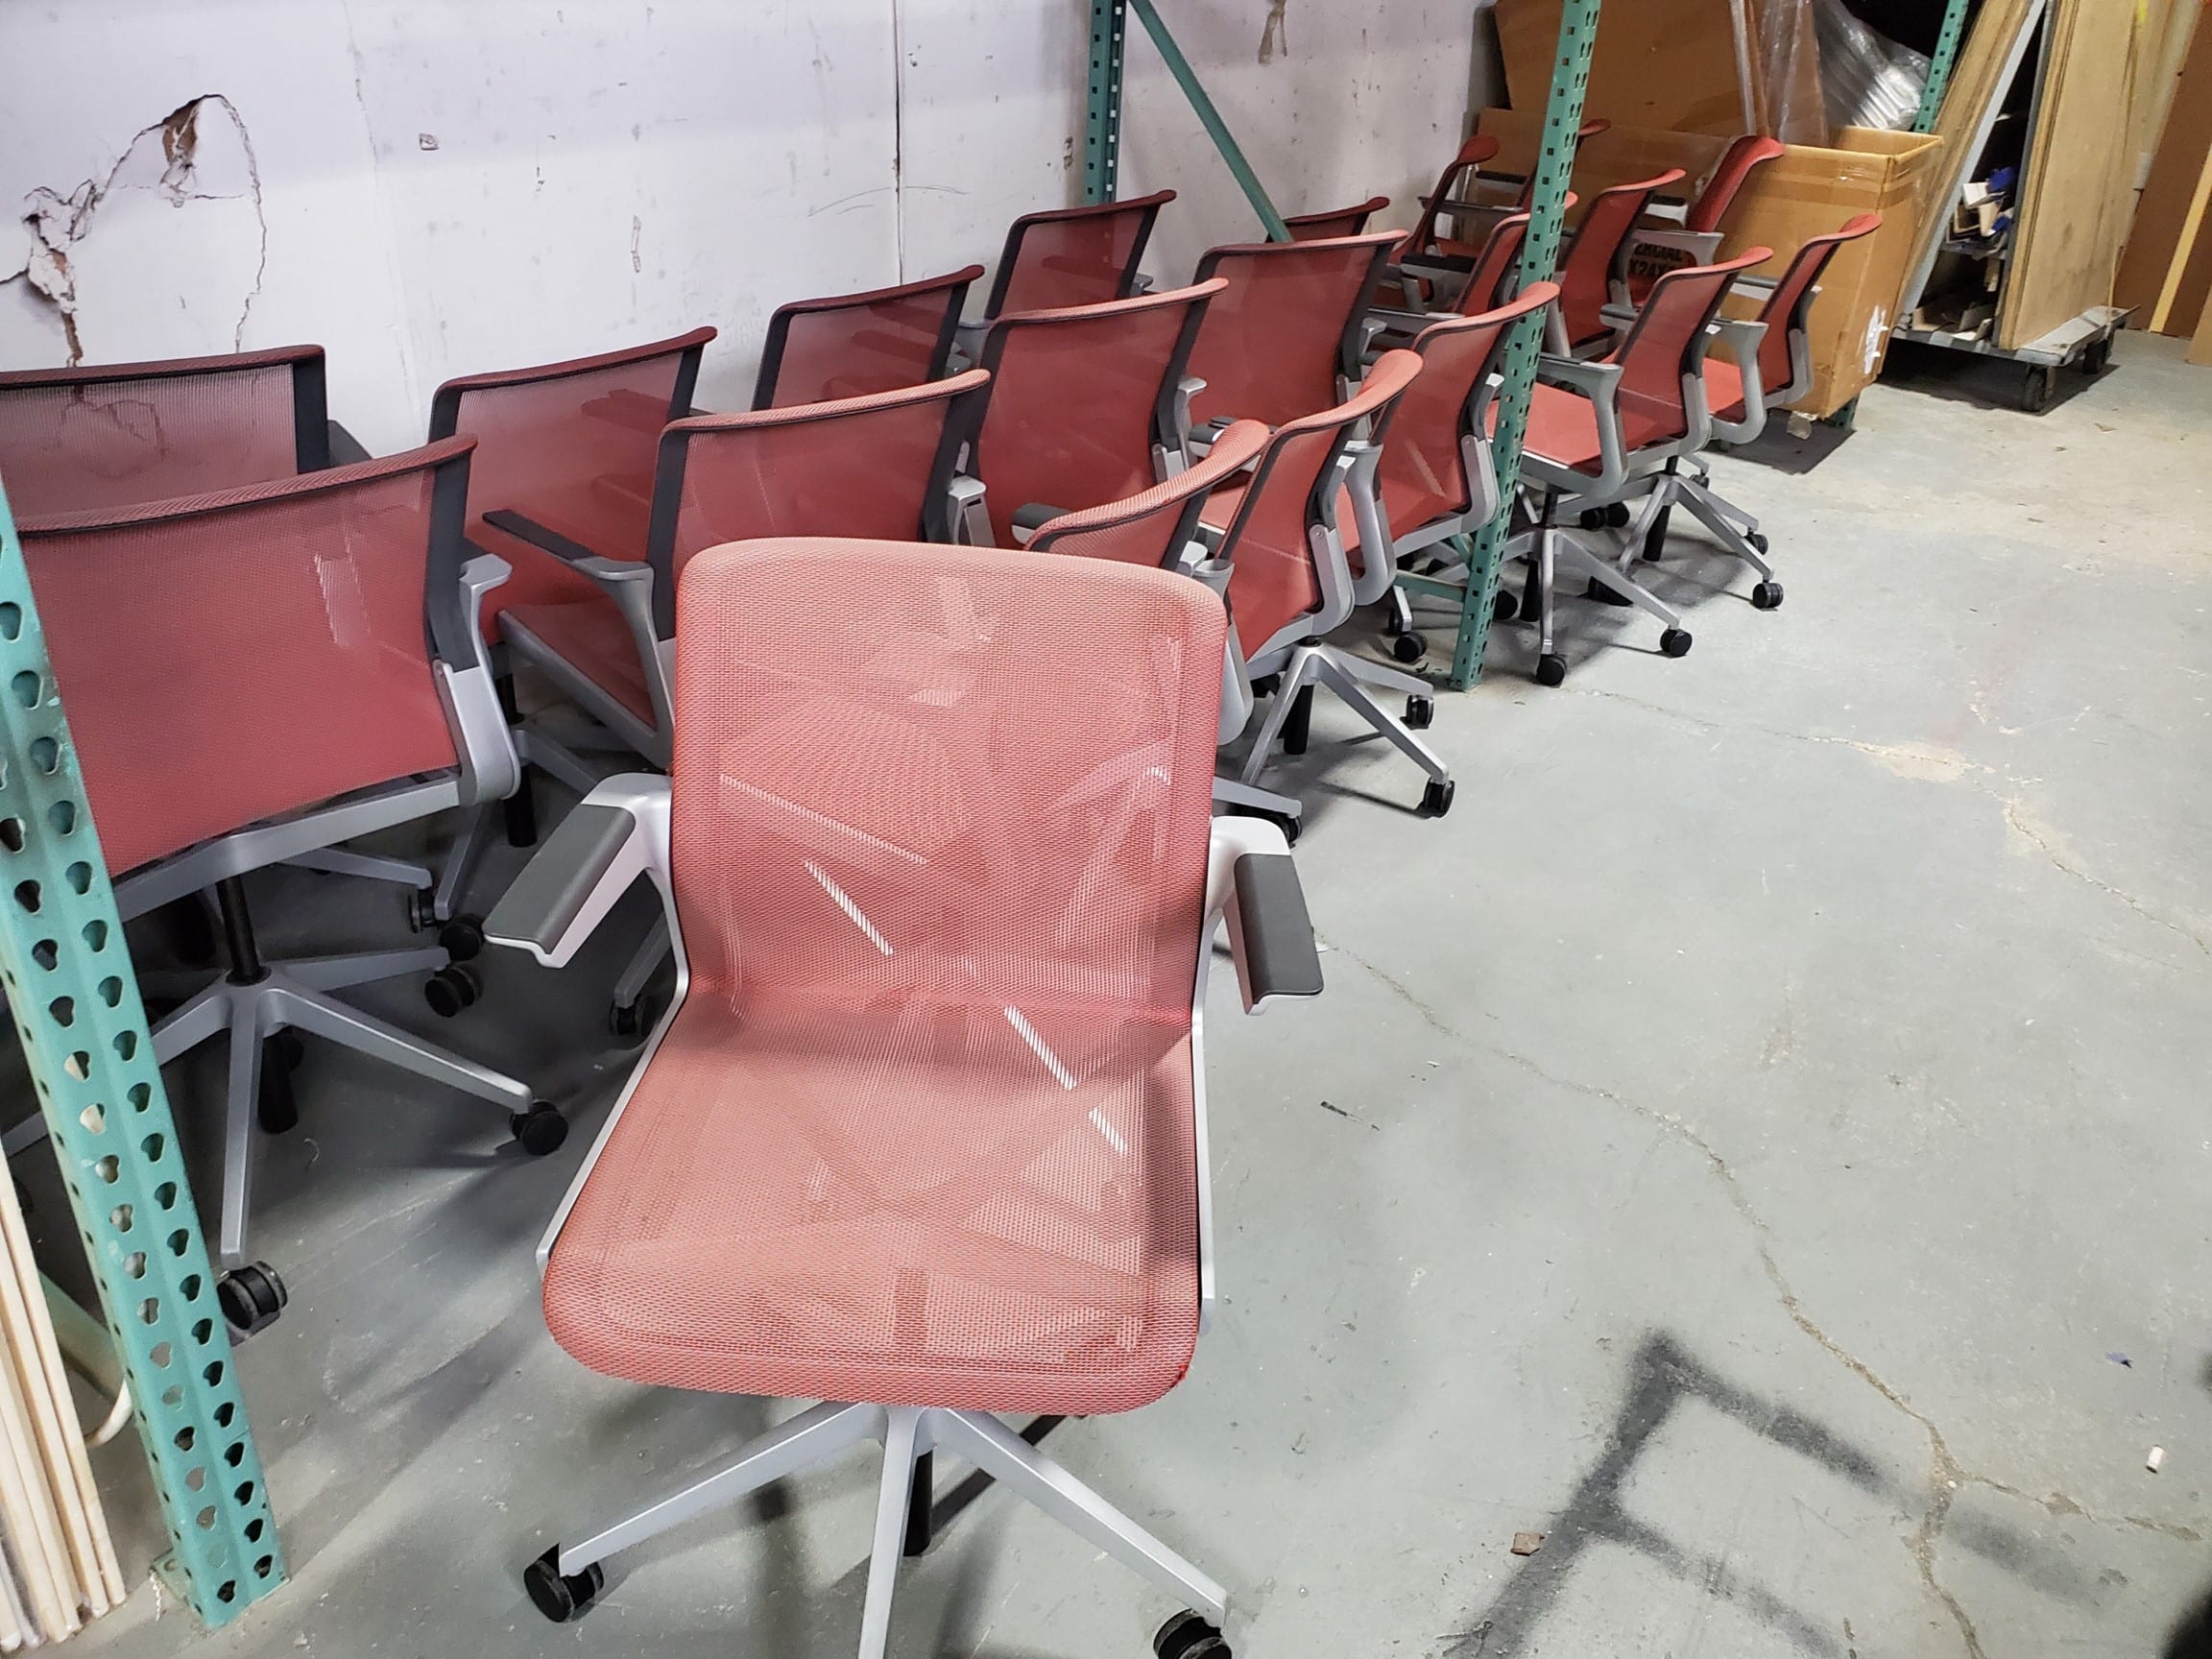 allsteel clarity chair used